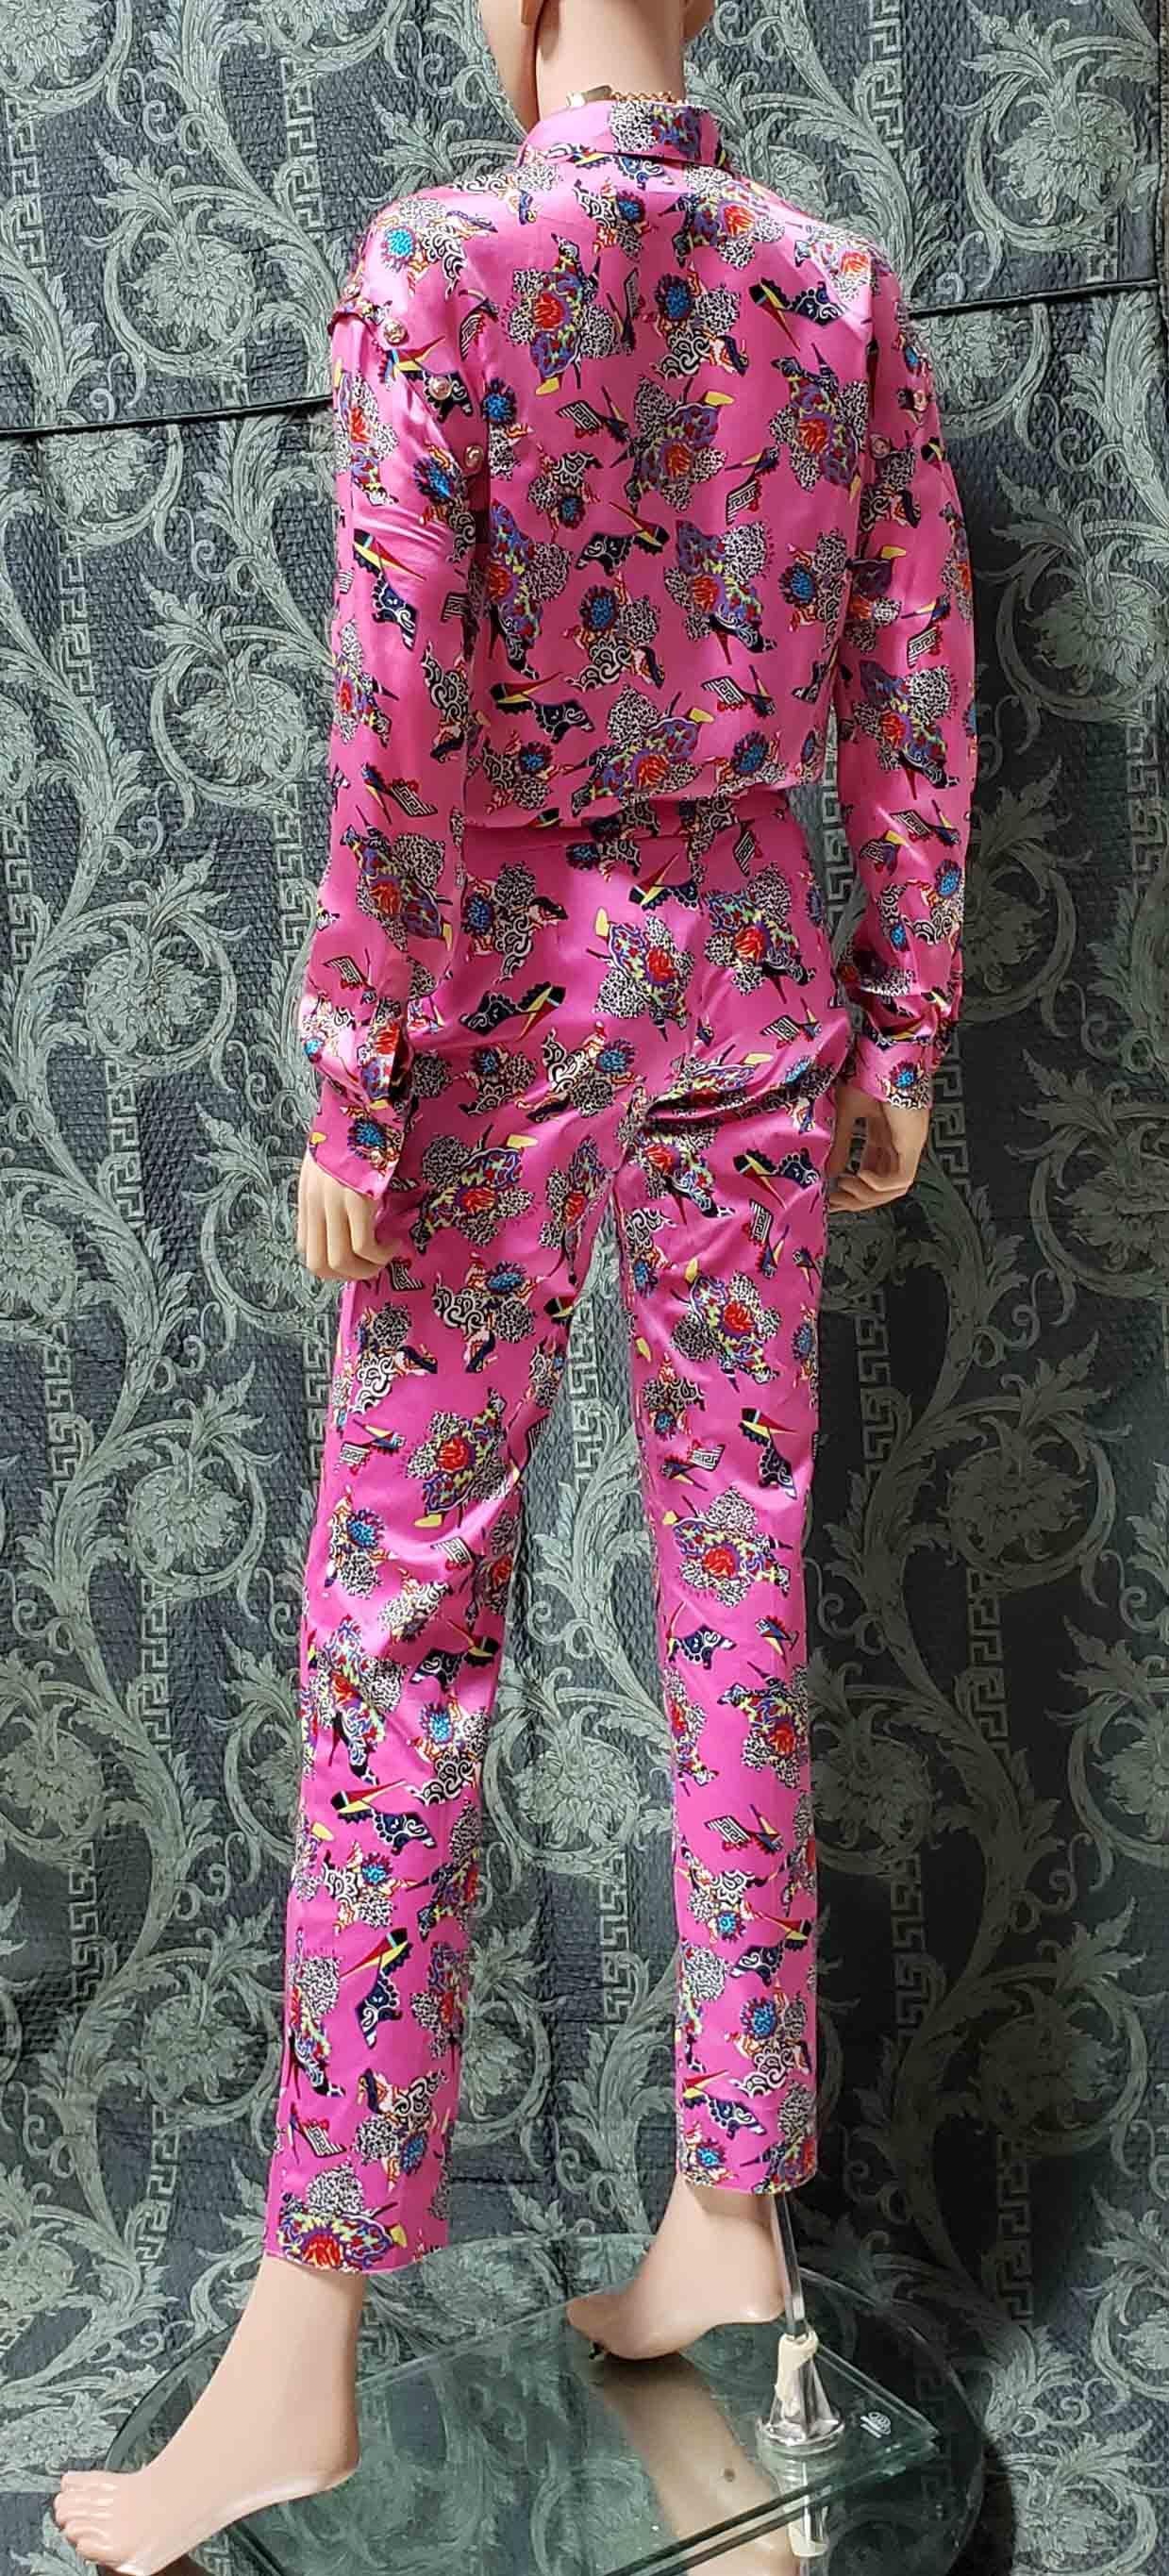 Resort 2013 Look # 8 NEW VERSACE ICONIC PRINT SILK and COTTON PANT SUIT 38 - 2 For Sale 2